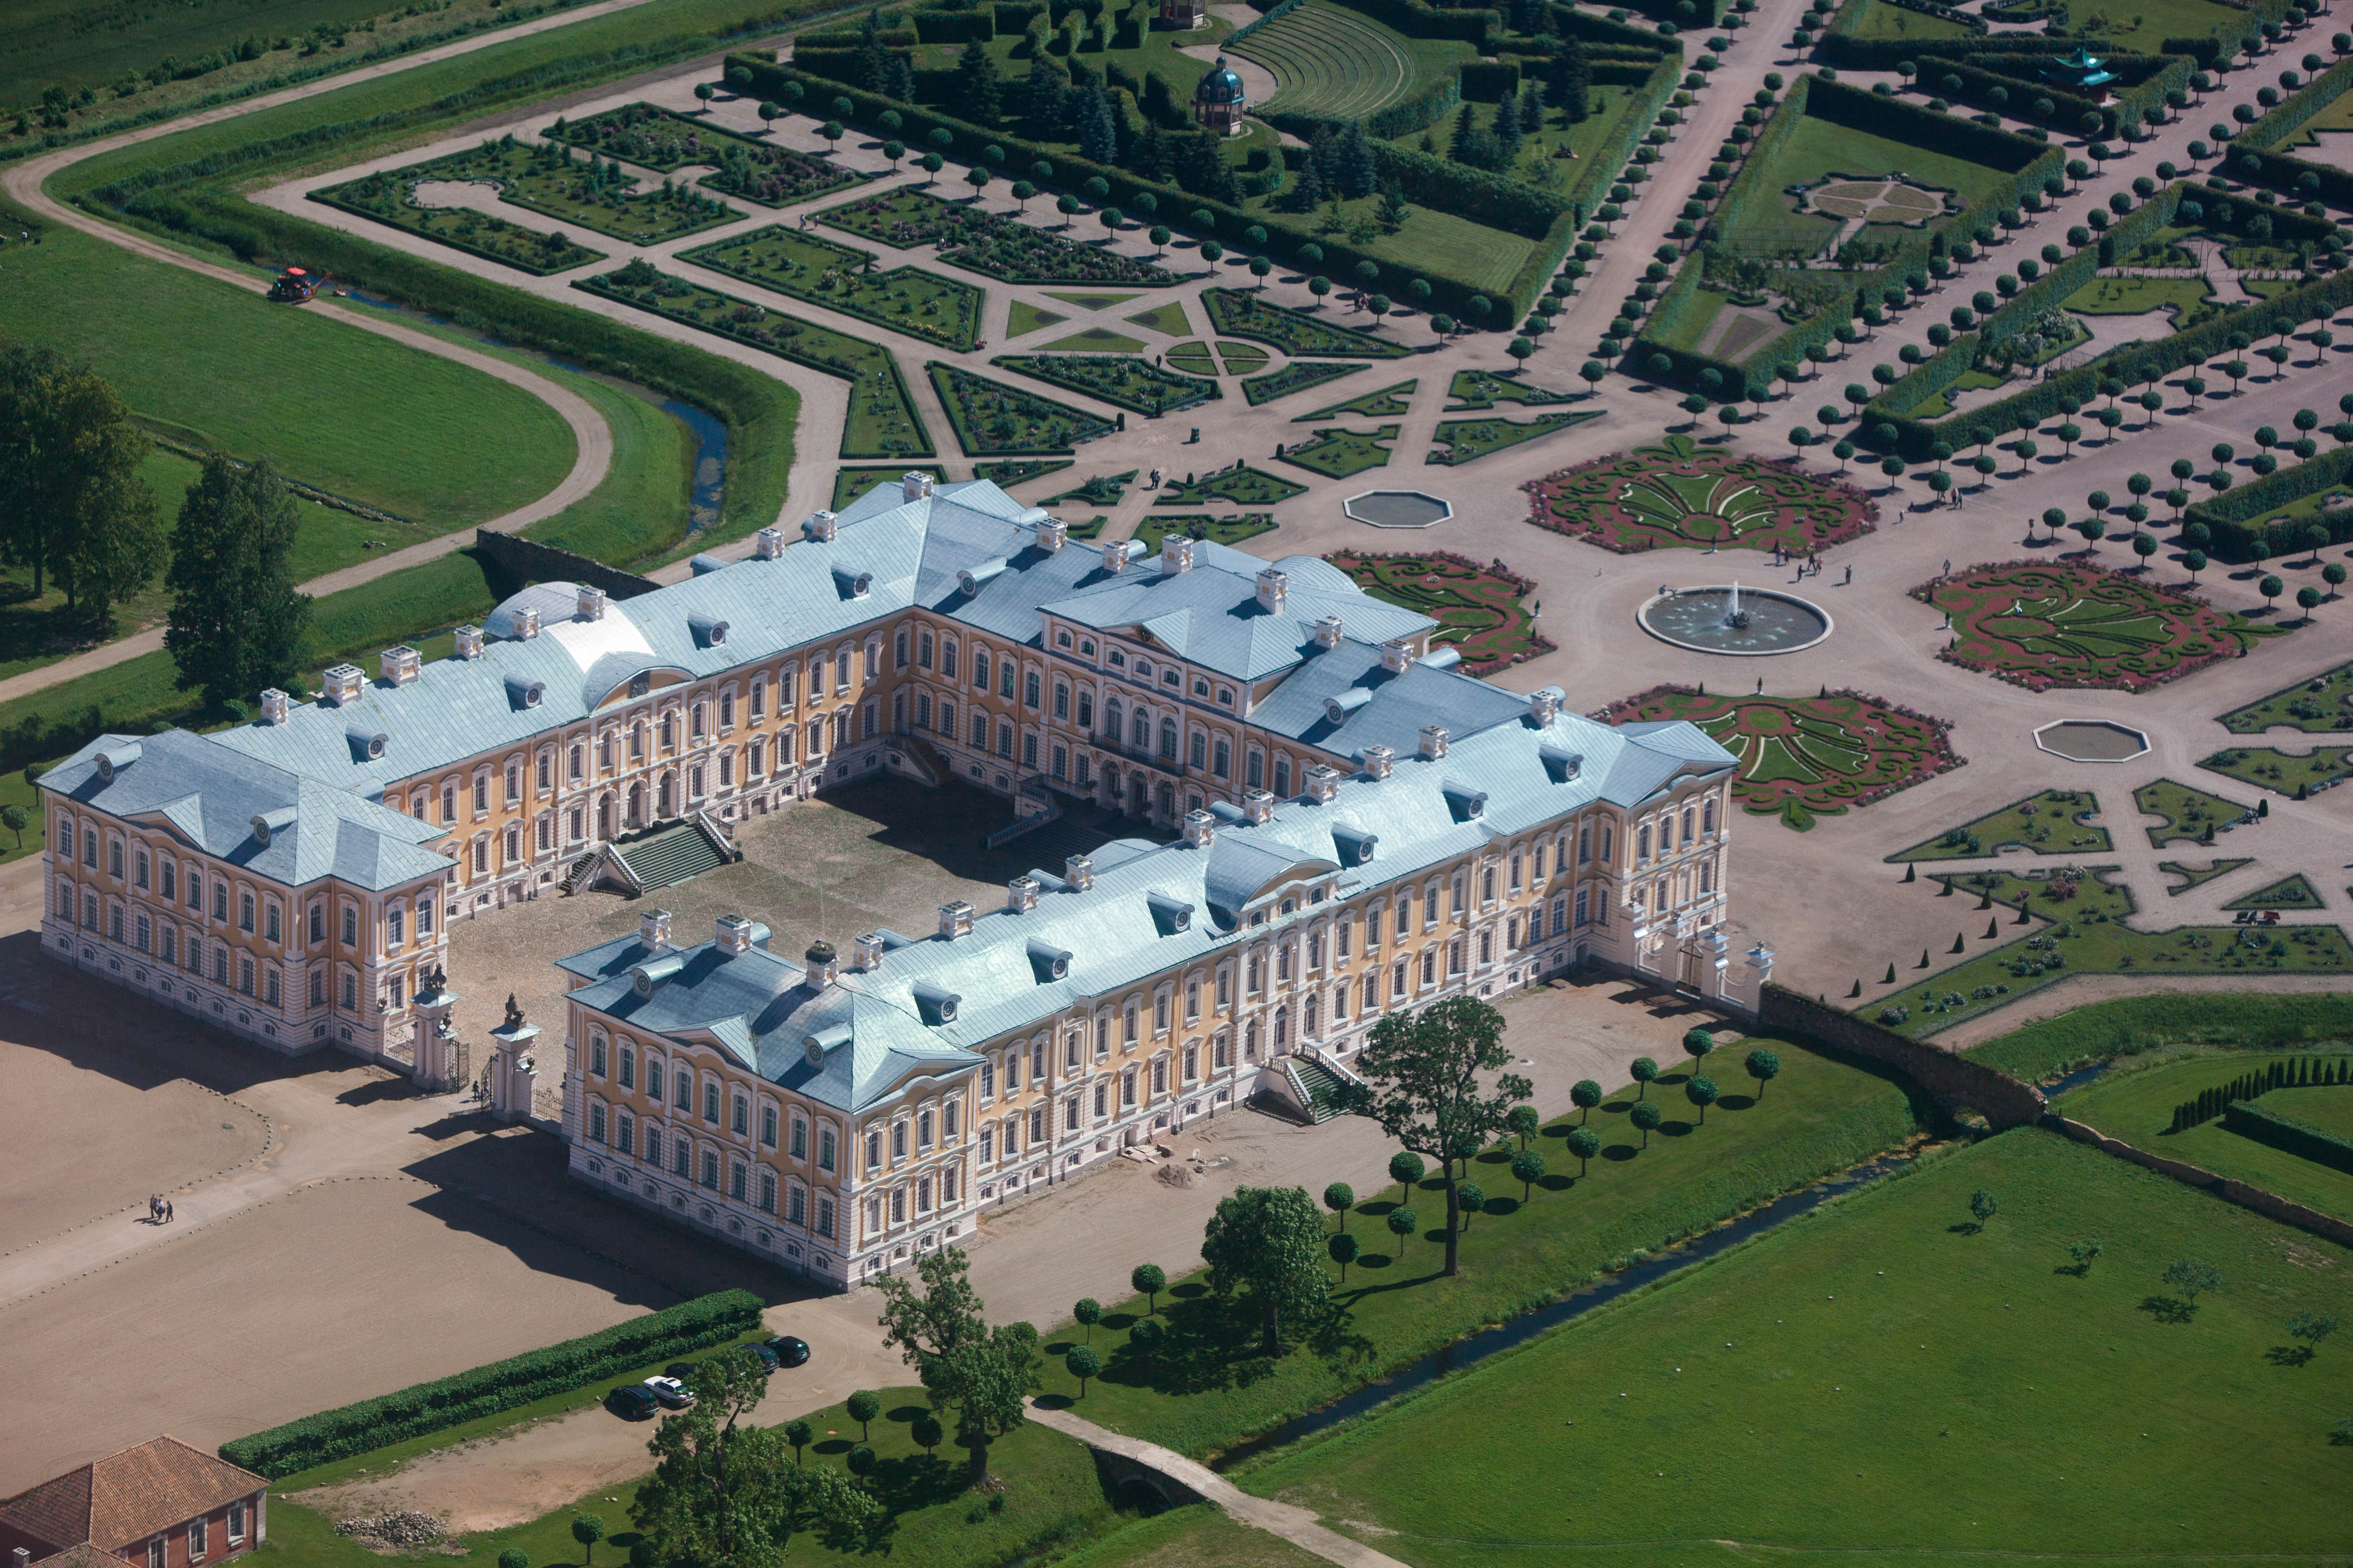 Rundale palace, still the most beautiful in the world. Latvia (10759228303)